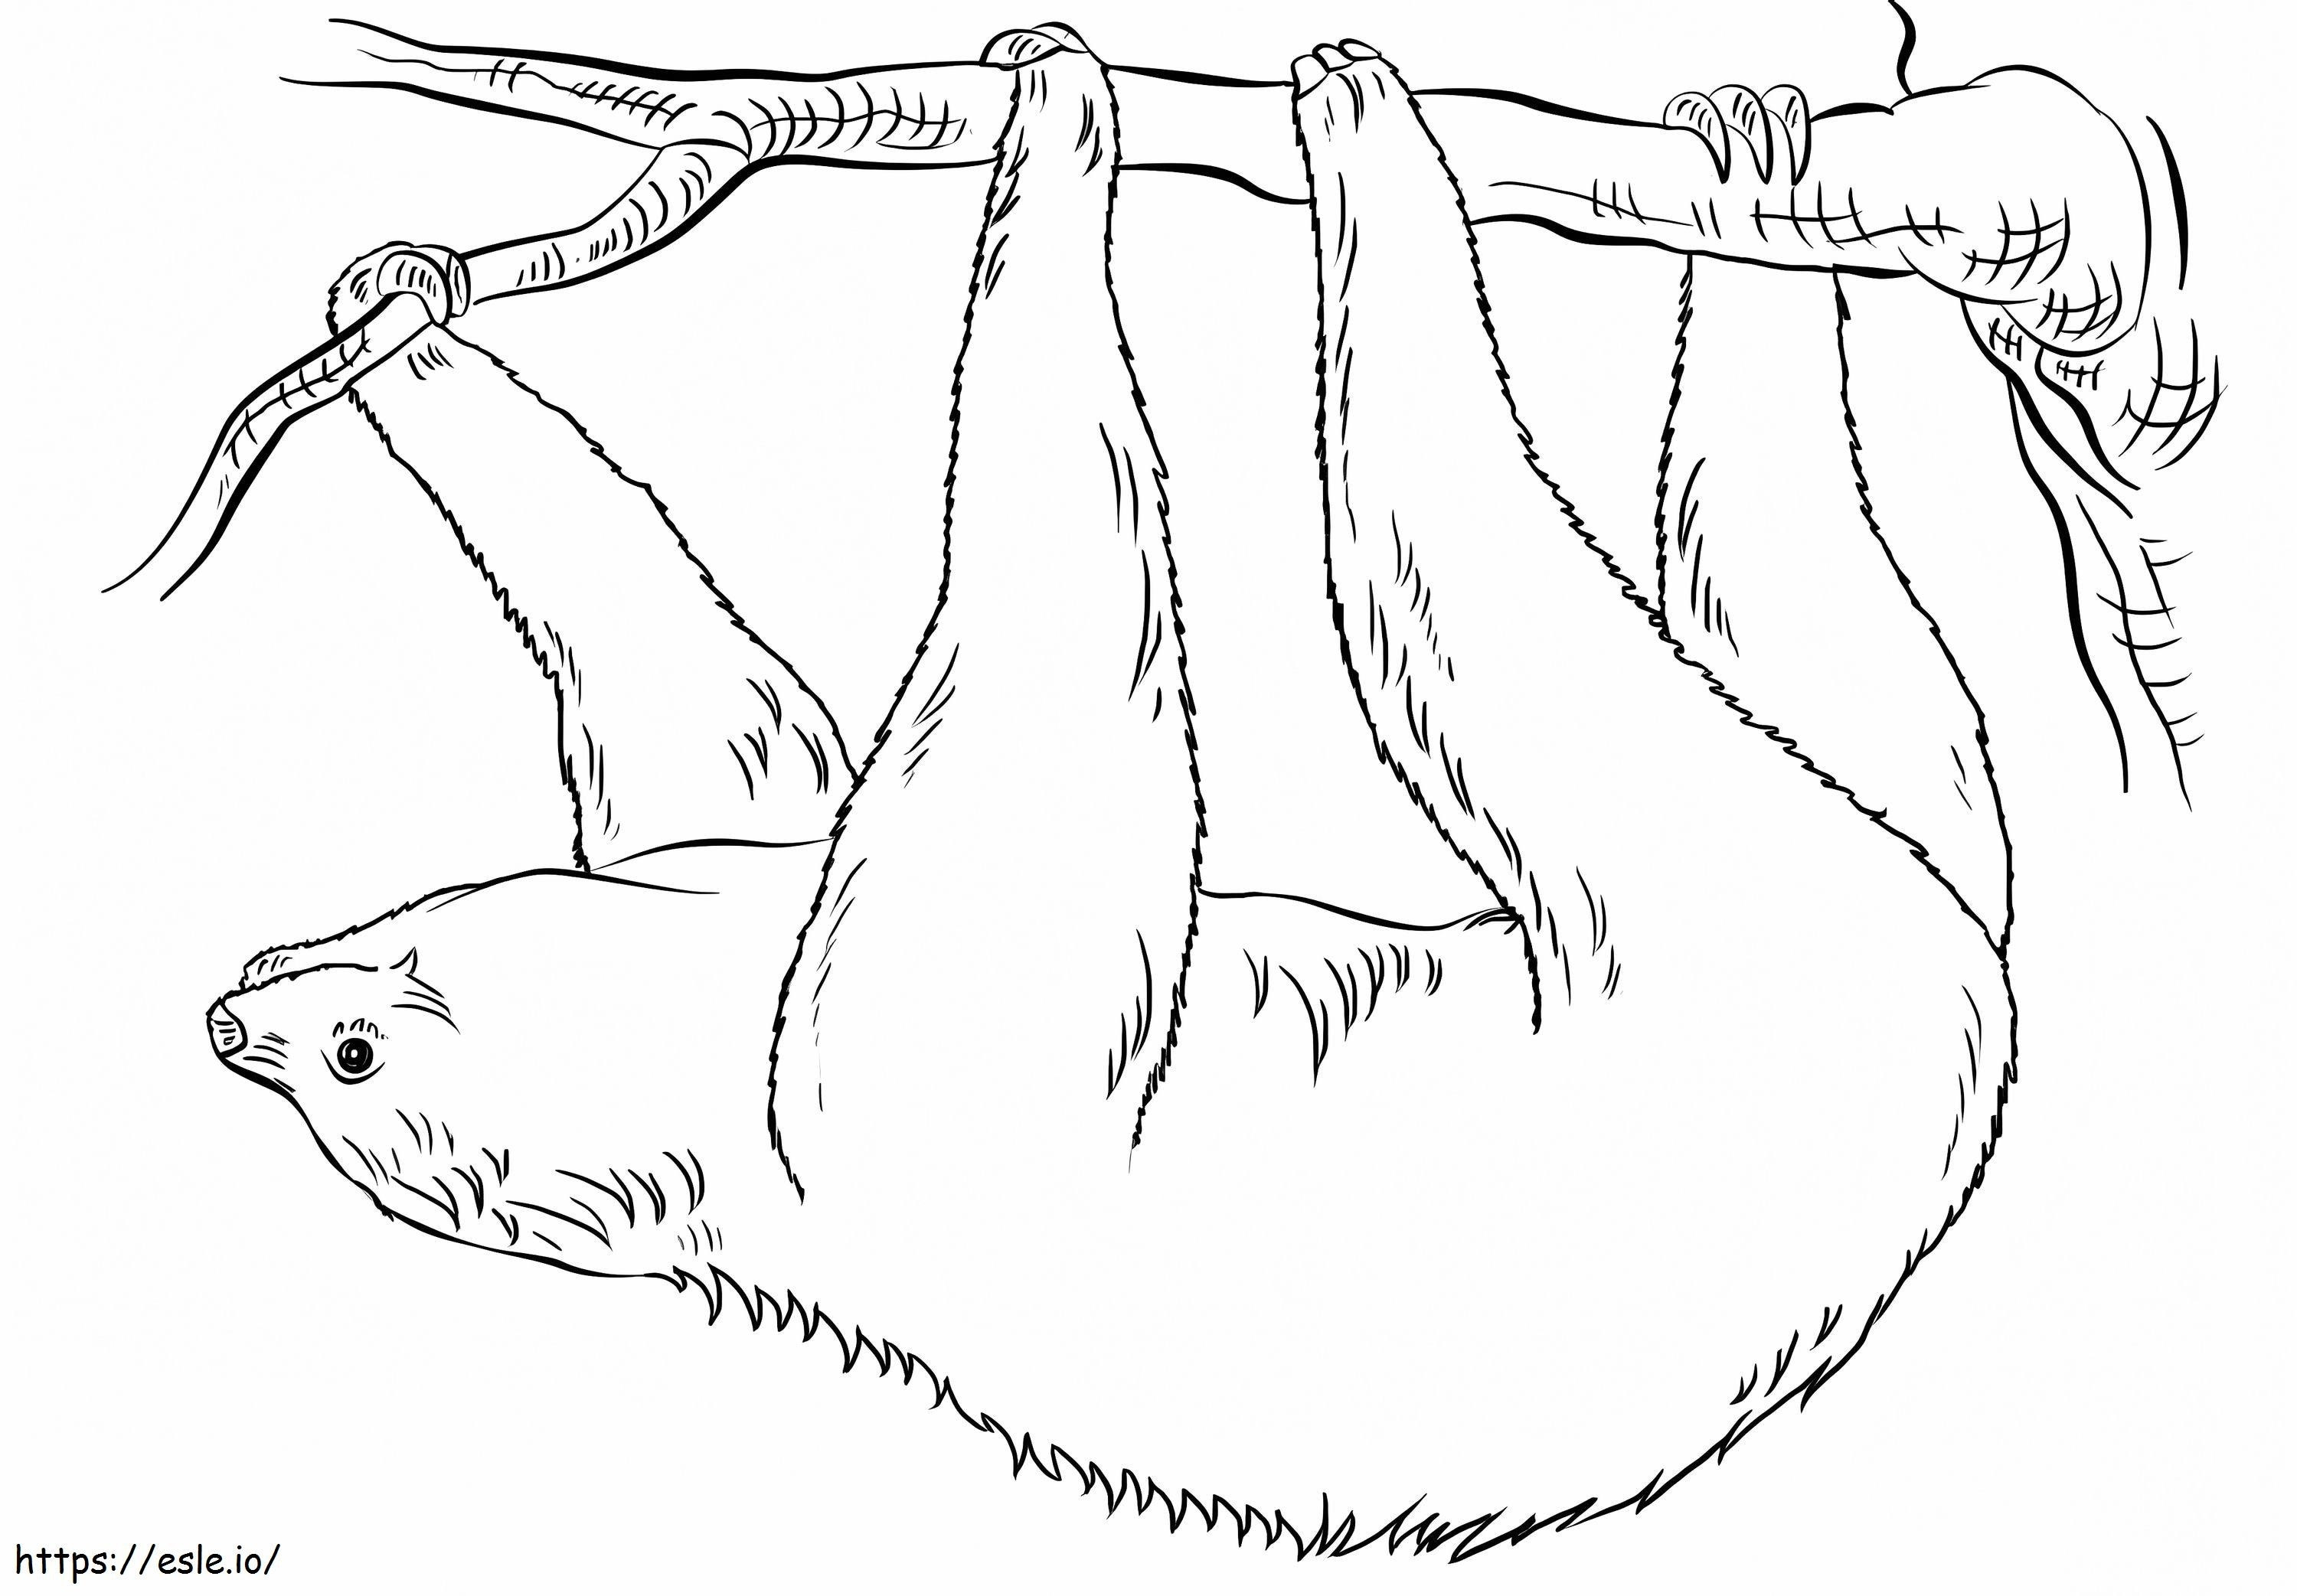 Sloth Hanging Upside Down coloring page